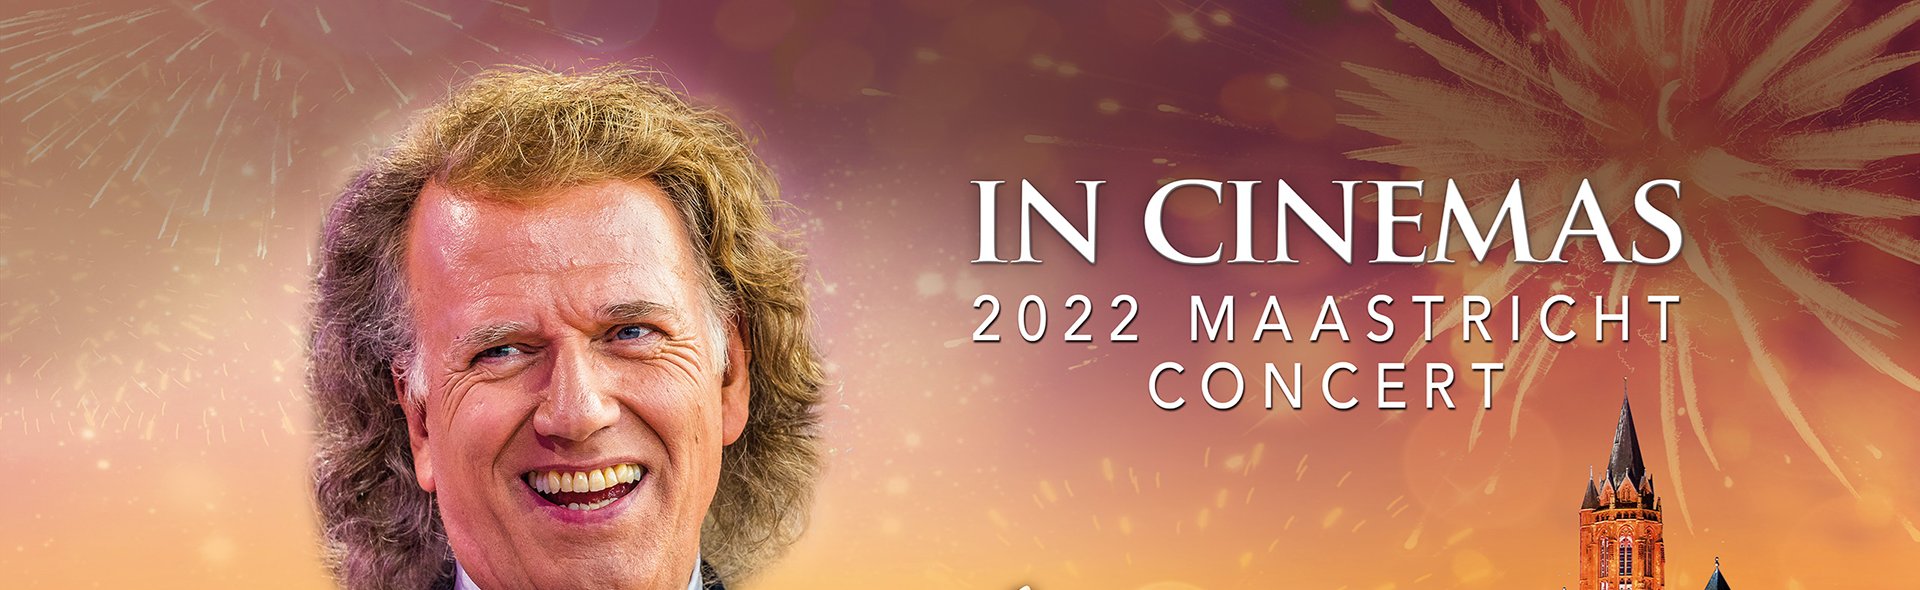 Andre Rieu’s 2022 Maastricht Concert: Happy Days are Here Again